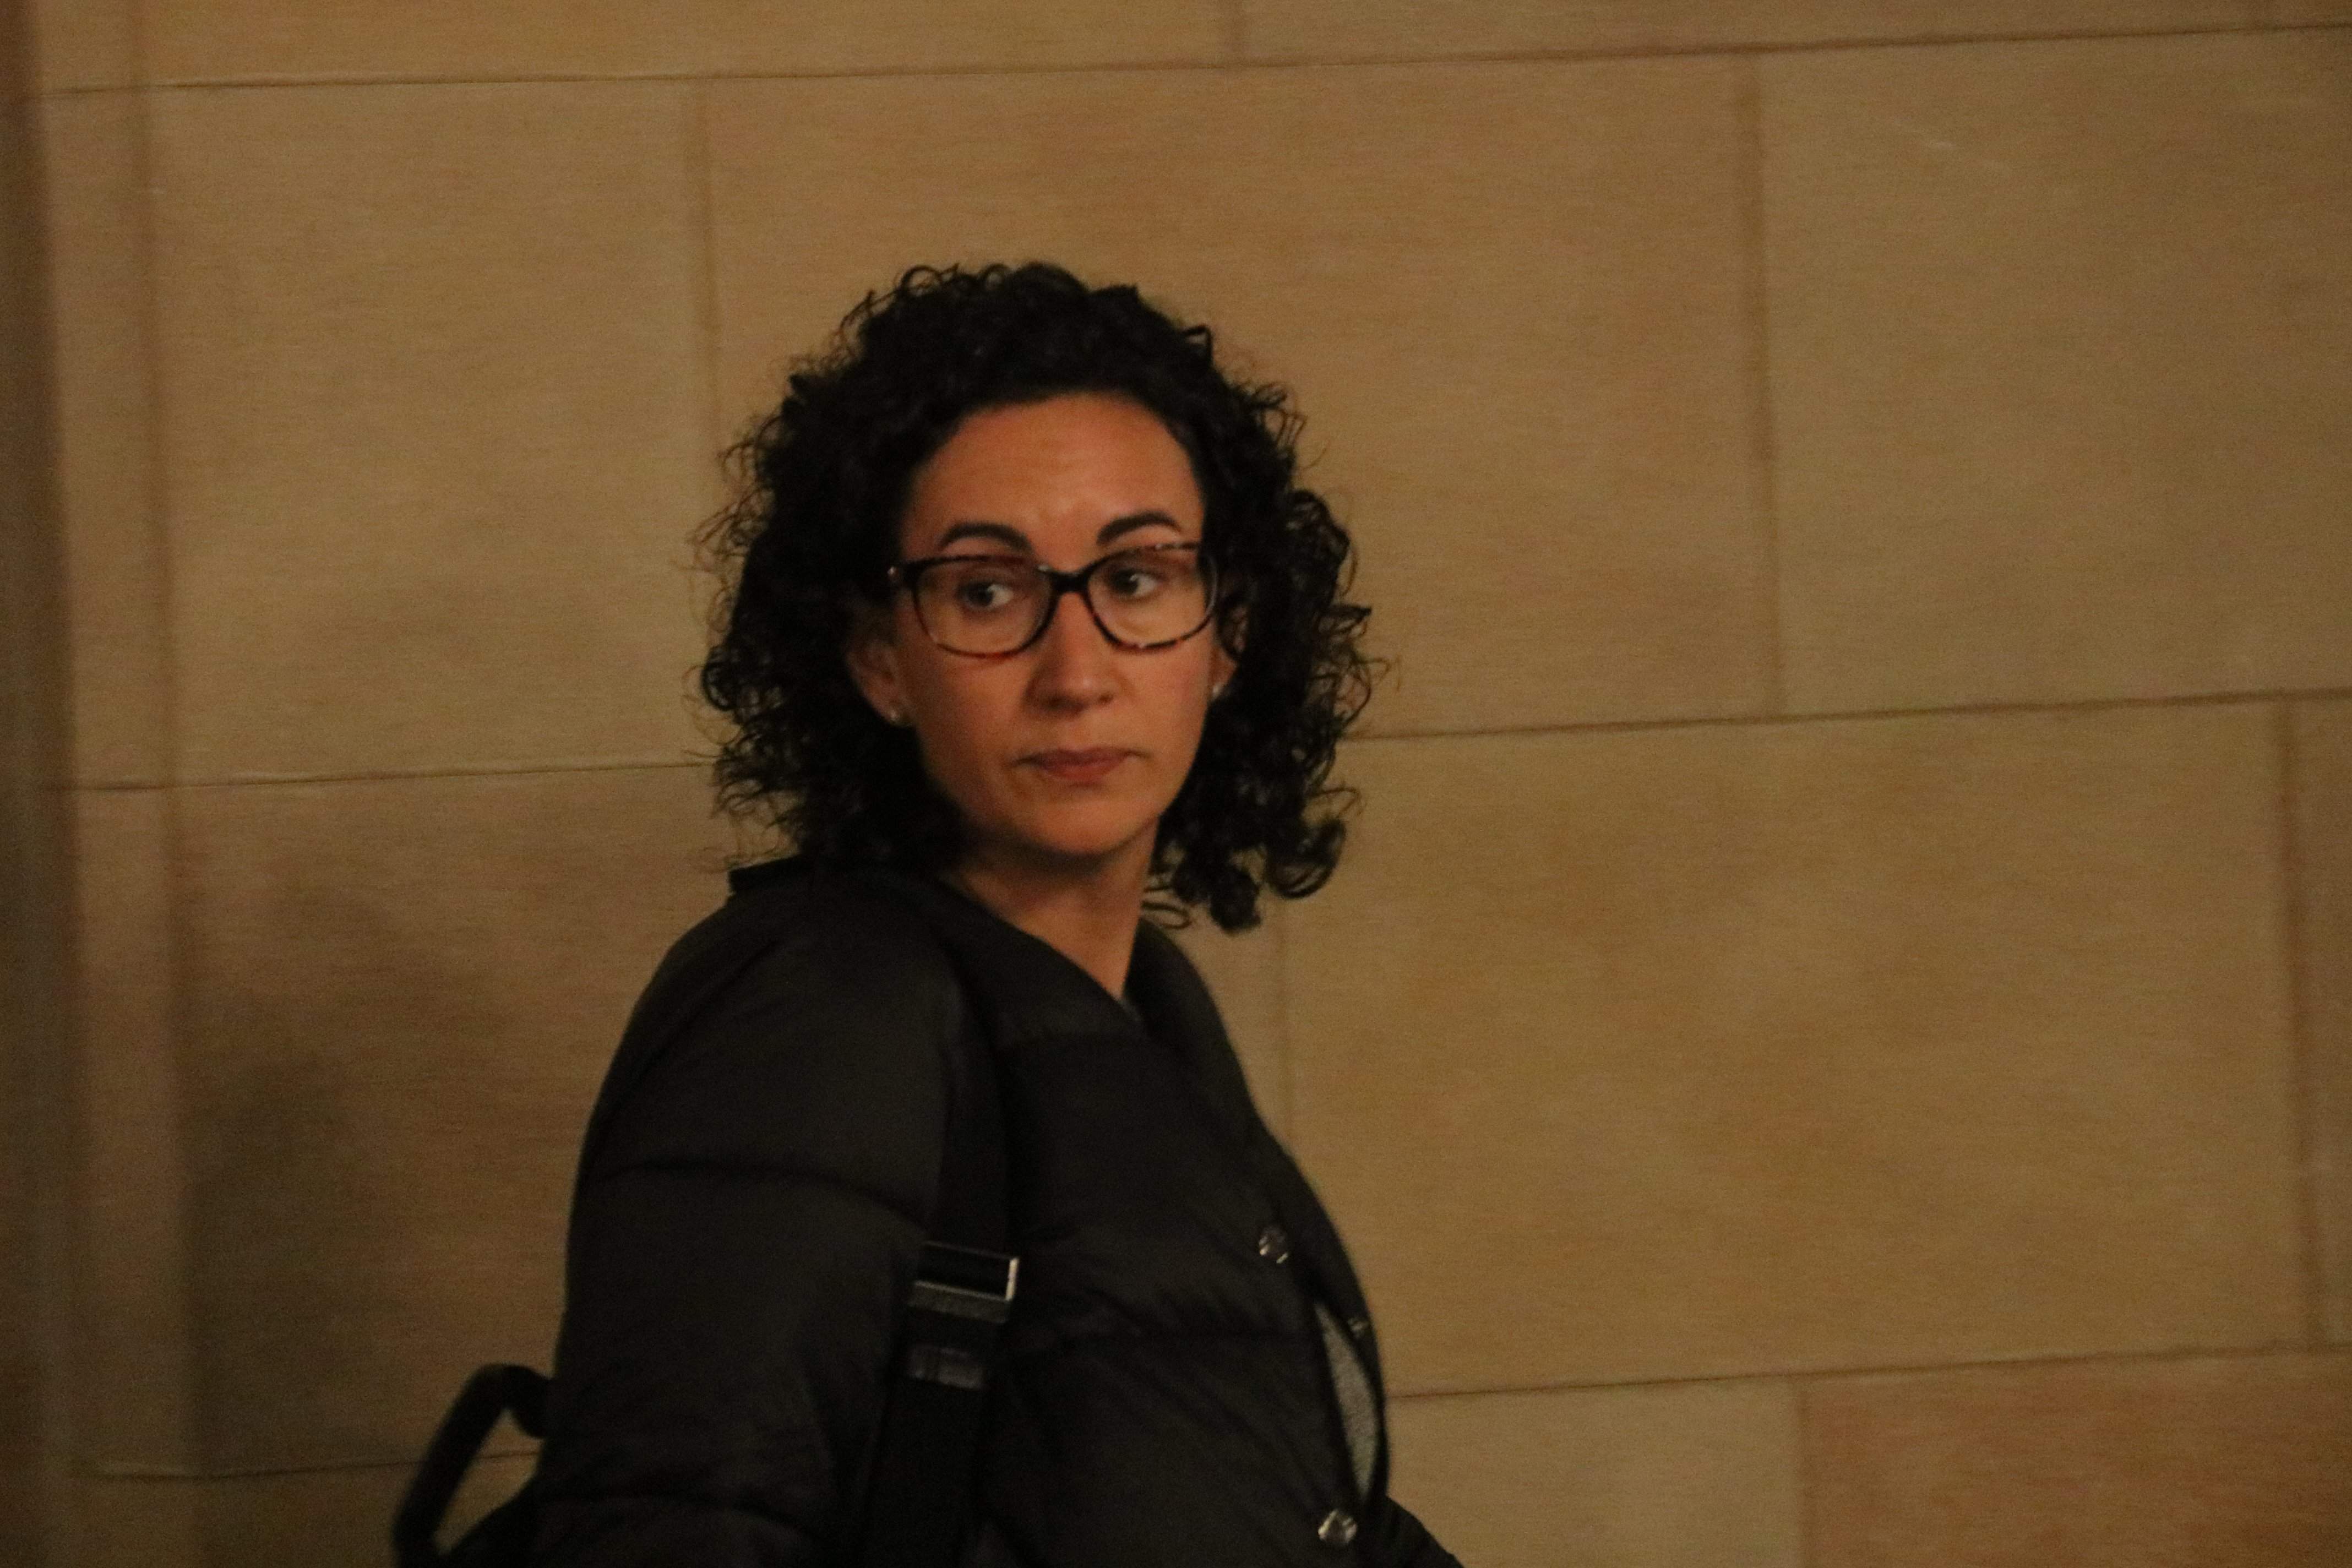 Unread Civil Guard report on a Catalan politician doesn't mention her name